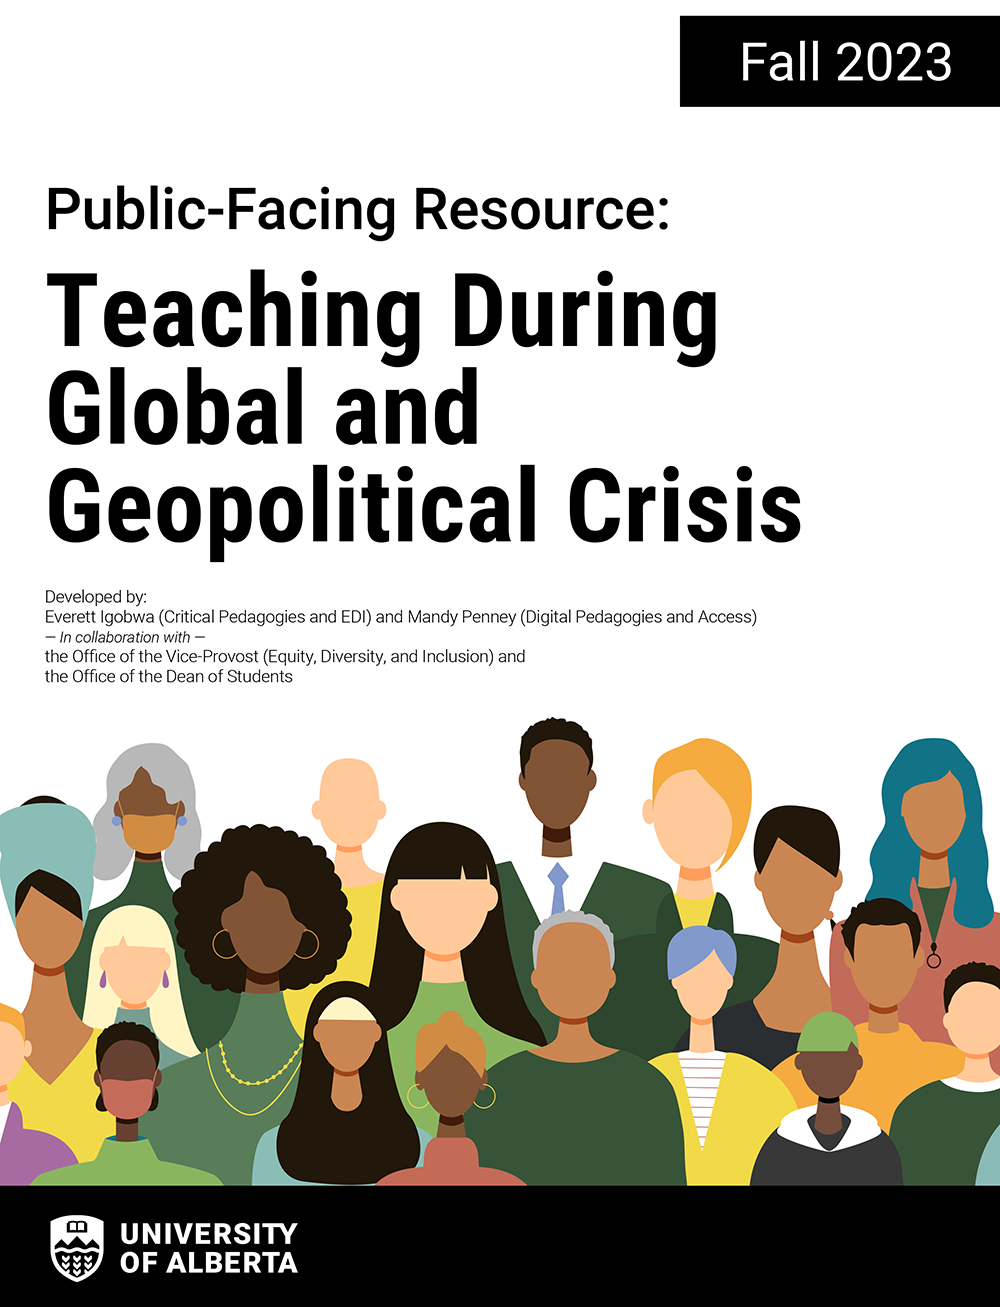 Teaching During Global and Geopolitical Crisis